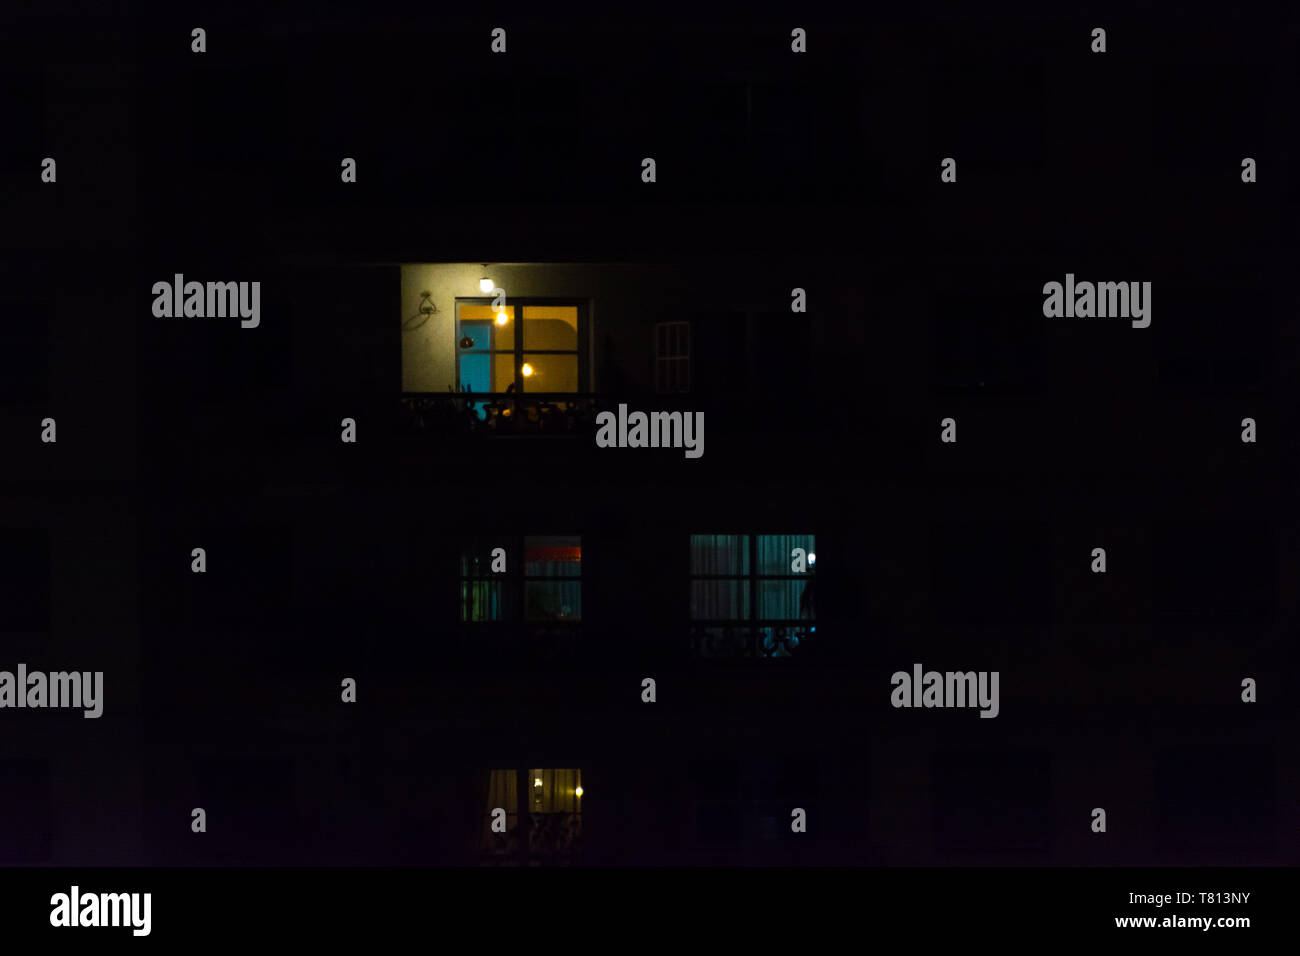 2019, May - Sao Paulo, Brazil. Multiple windows of an apartment building at night. Some yellow, some blue, some light on, some light off. Stock Photo